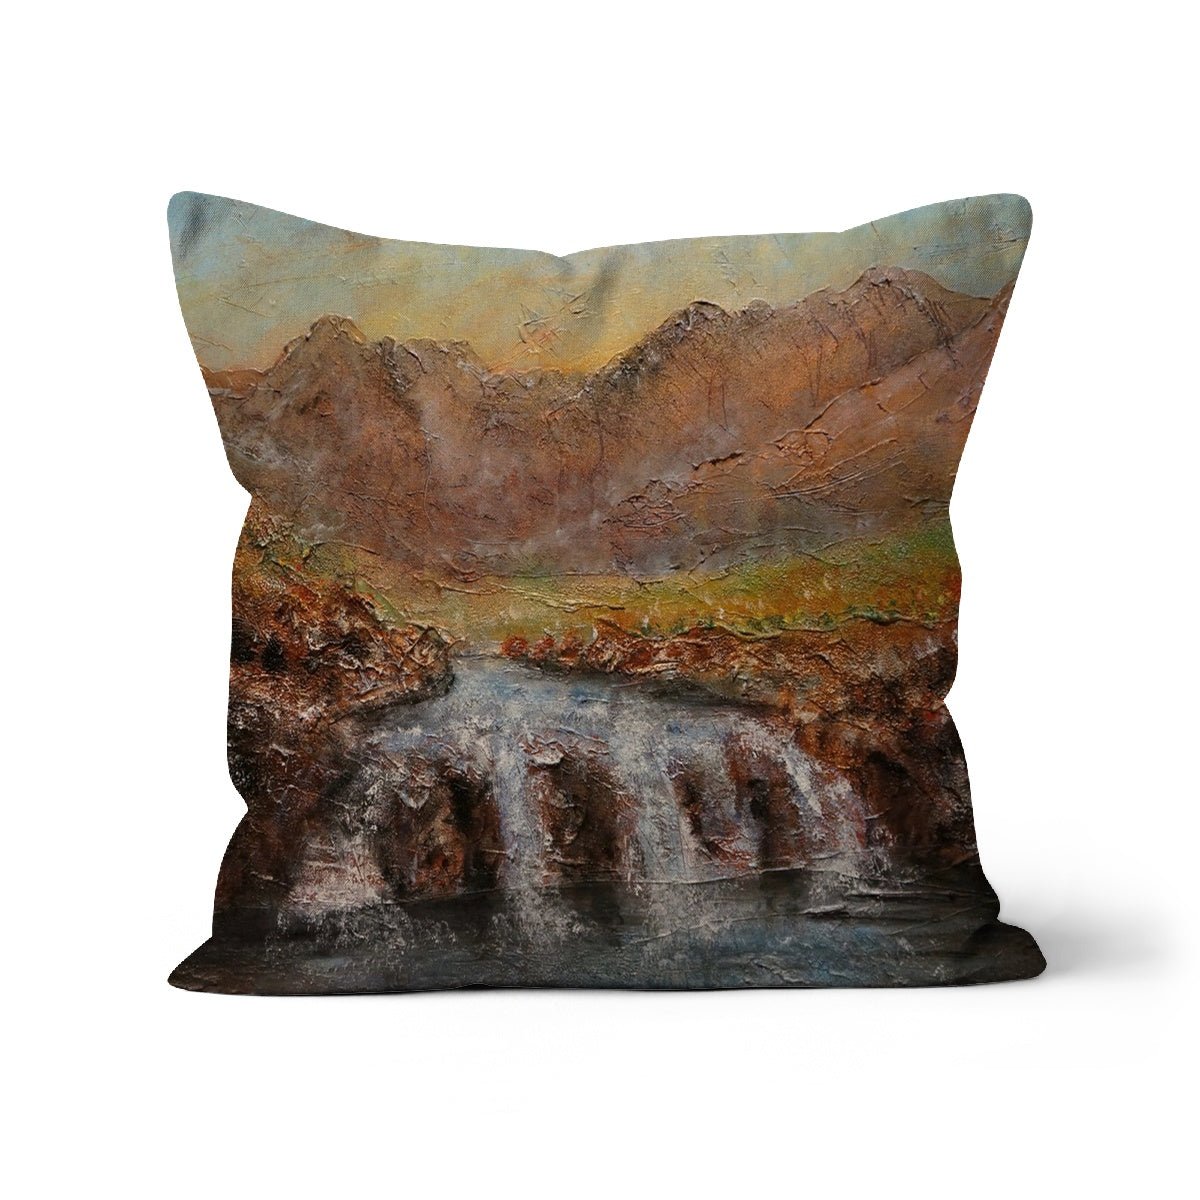 Fairy Pools Dawn Skye Art Gifts Cushion-Cushions-Skye Art Gallery-Canvas-12"x12"-Paintings, Prints, Homeware, Art Gifts From Scotland By Scottish Artist Kevin Hunter